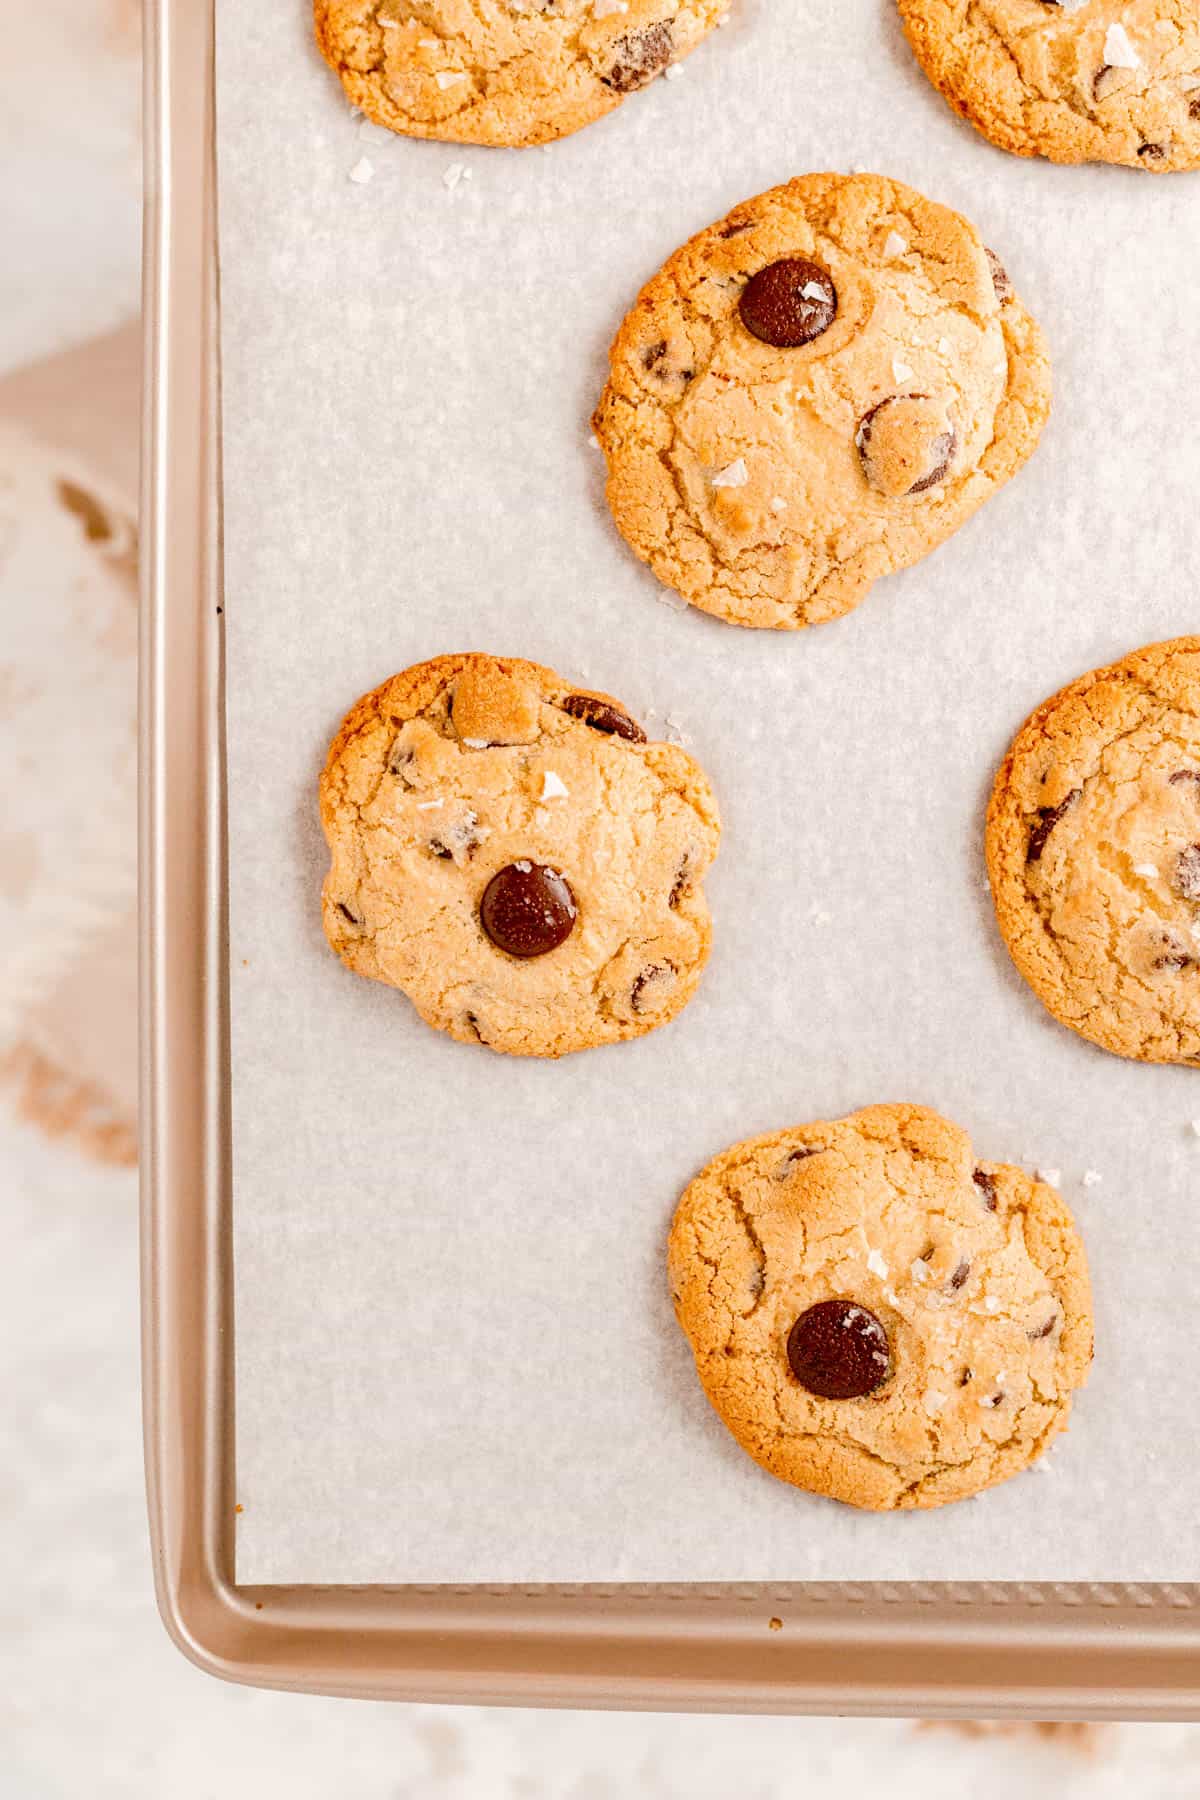 baked and puffy salted chocolate chip cookies on a gold cookie sheet.